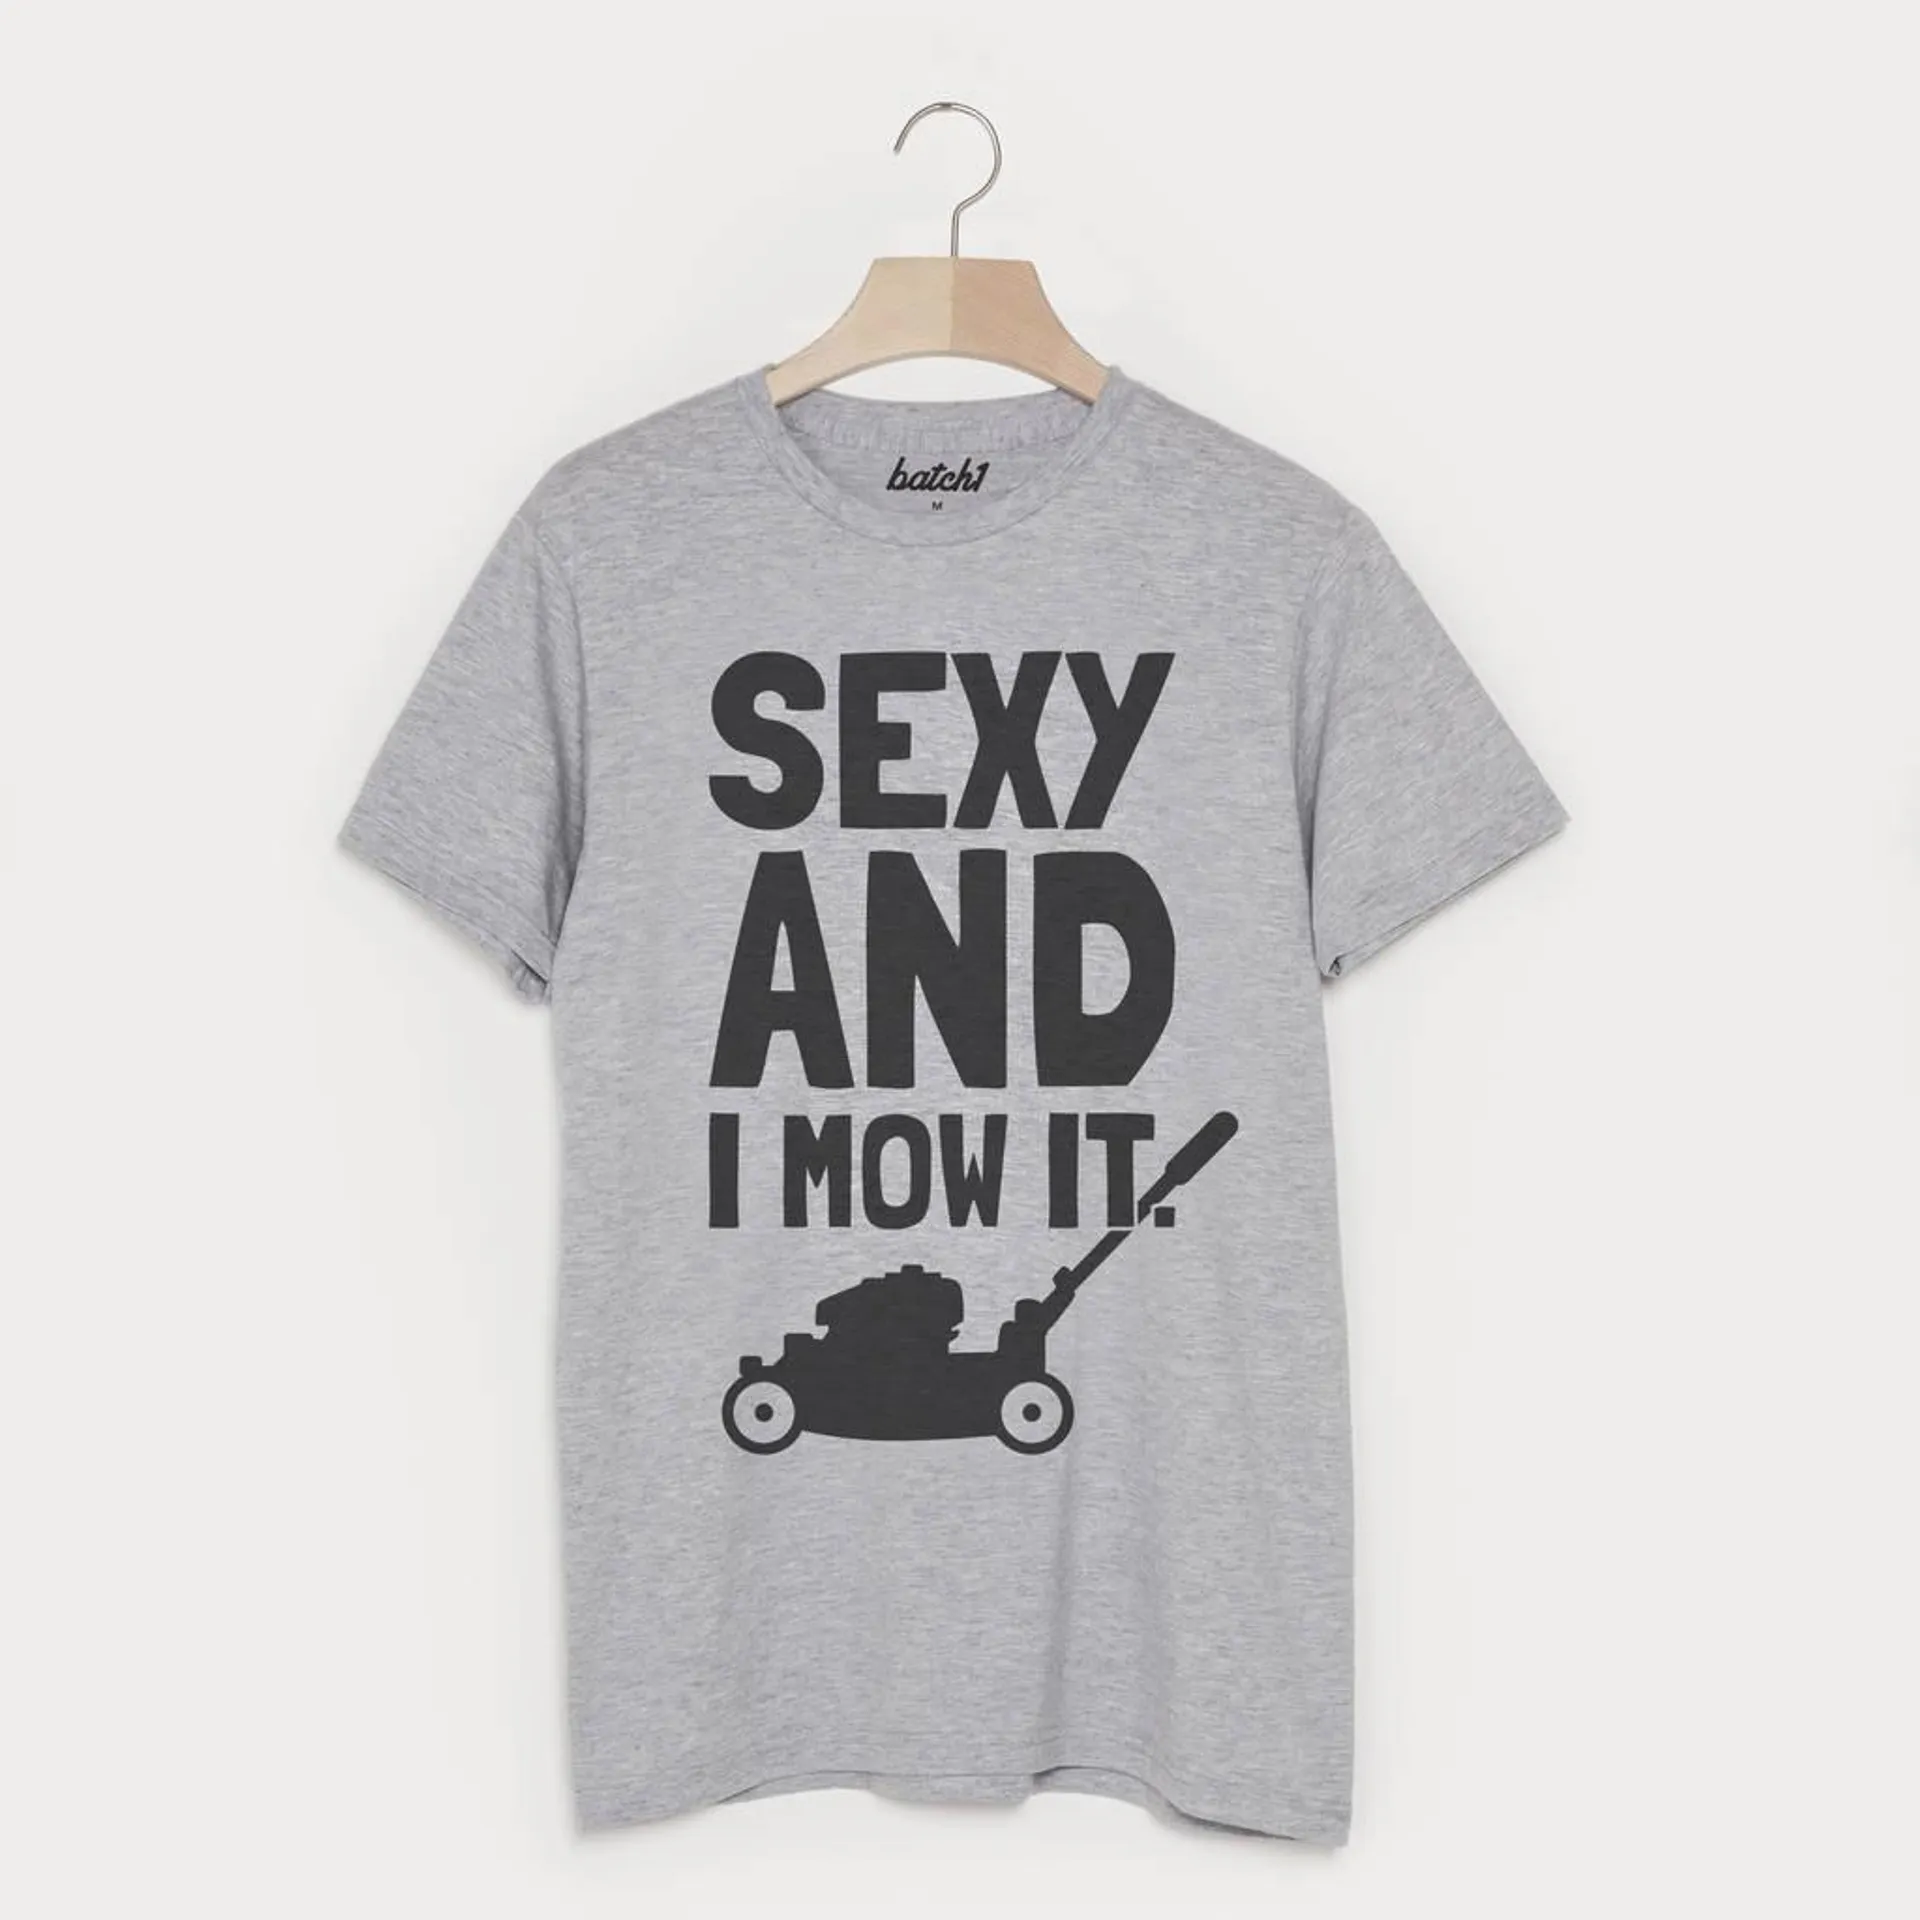 Sexy And I Mow It Funny Men's Gardening T Shirt